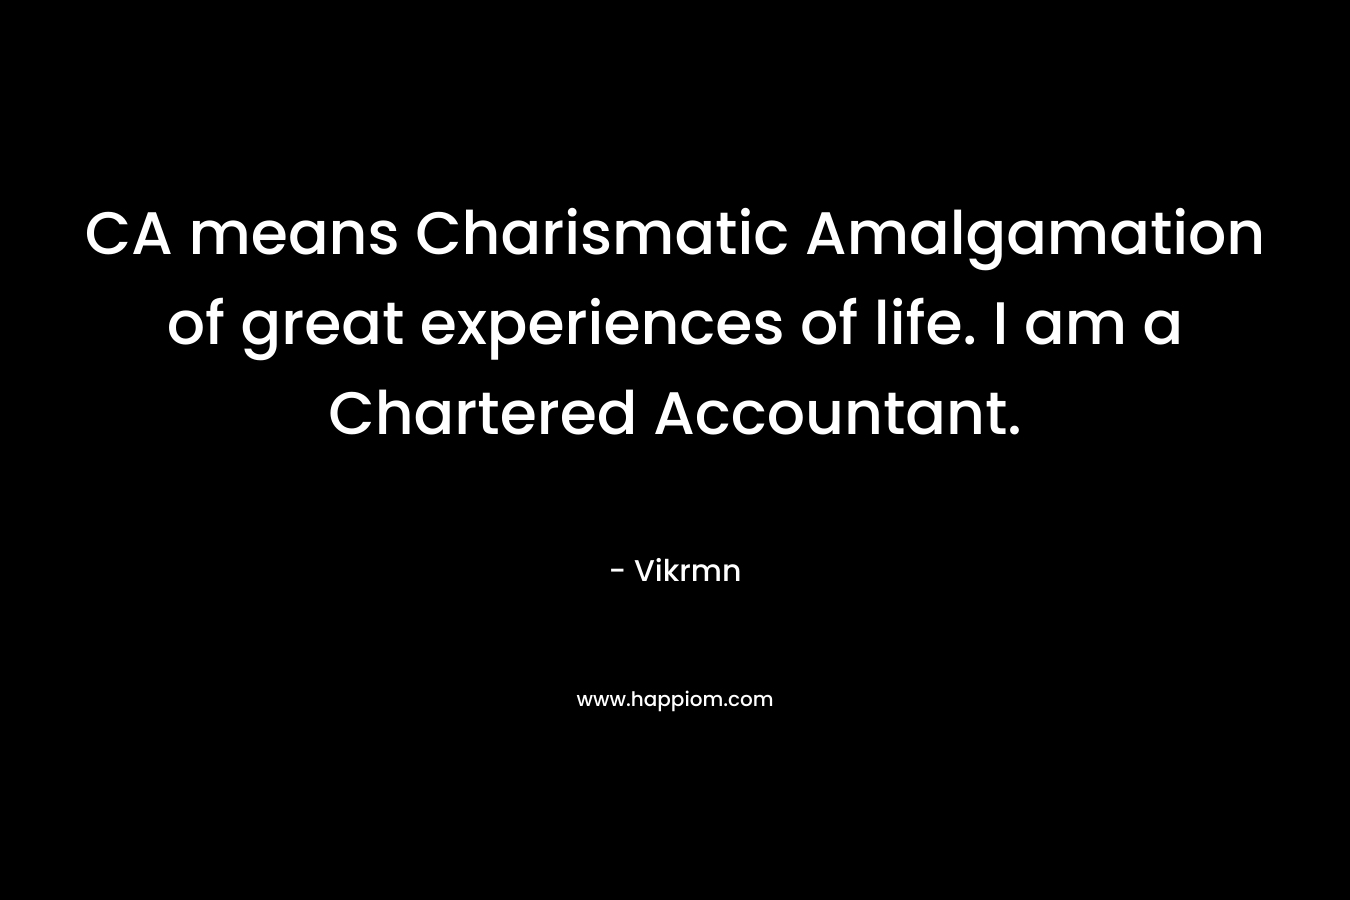 CA means Charismatic Amalgamation of great experiences of life. I am a Chartered Accountant.